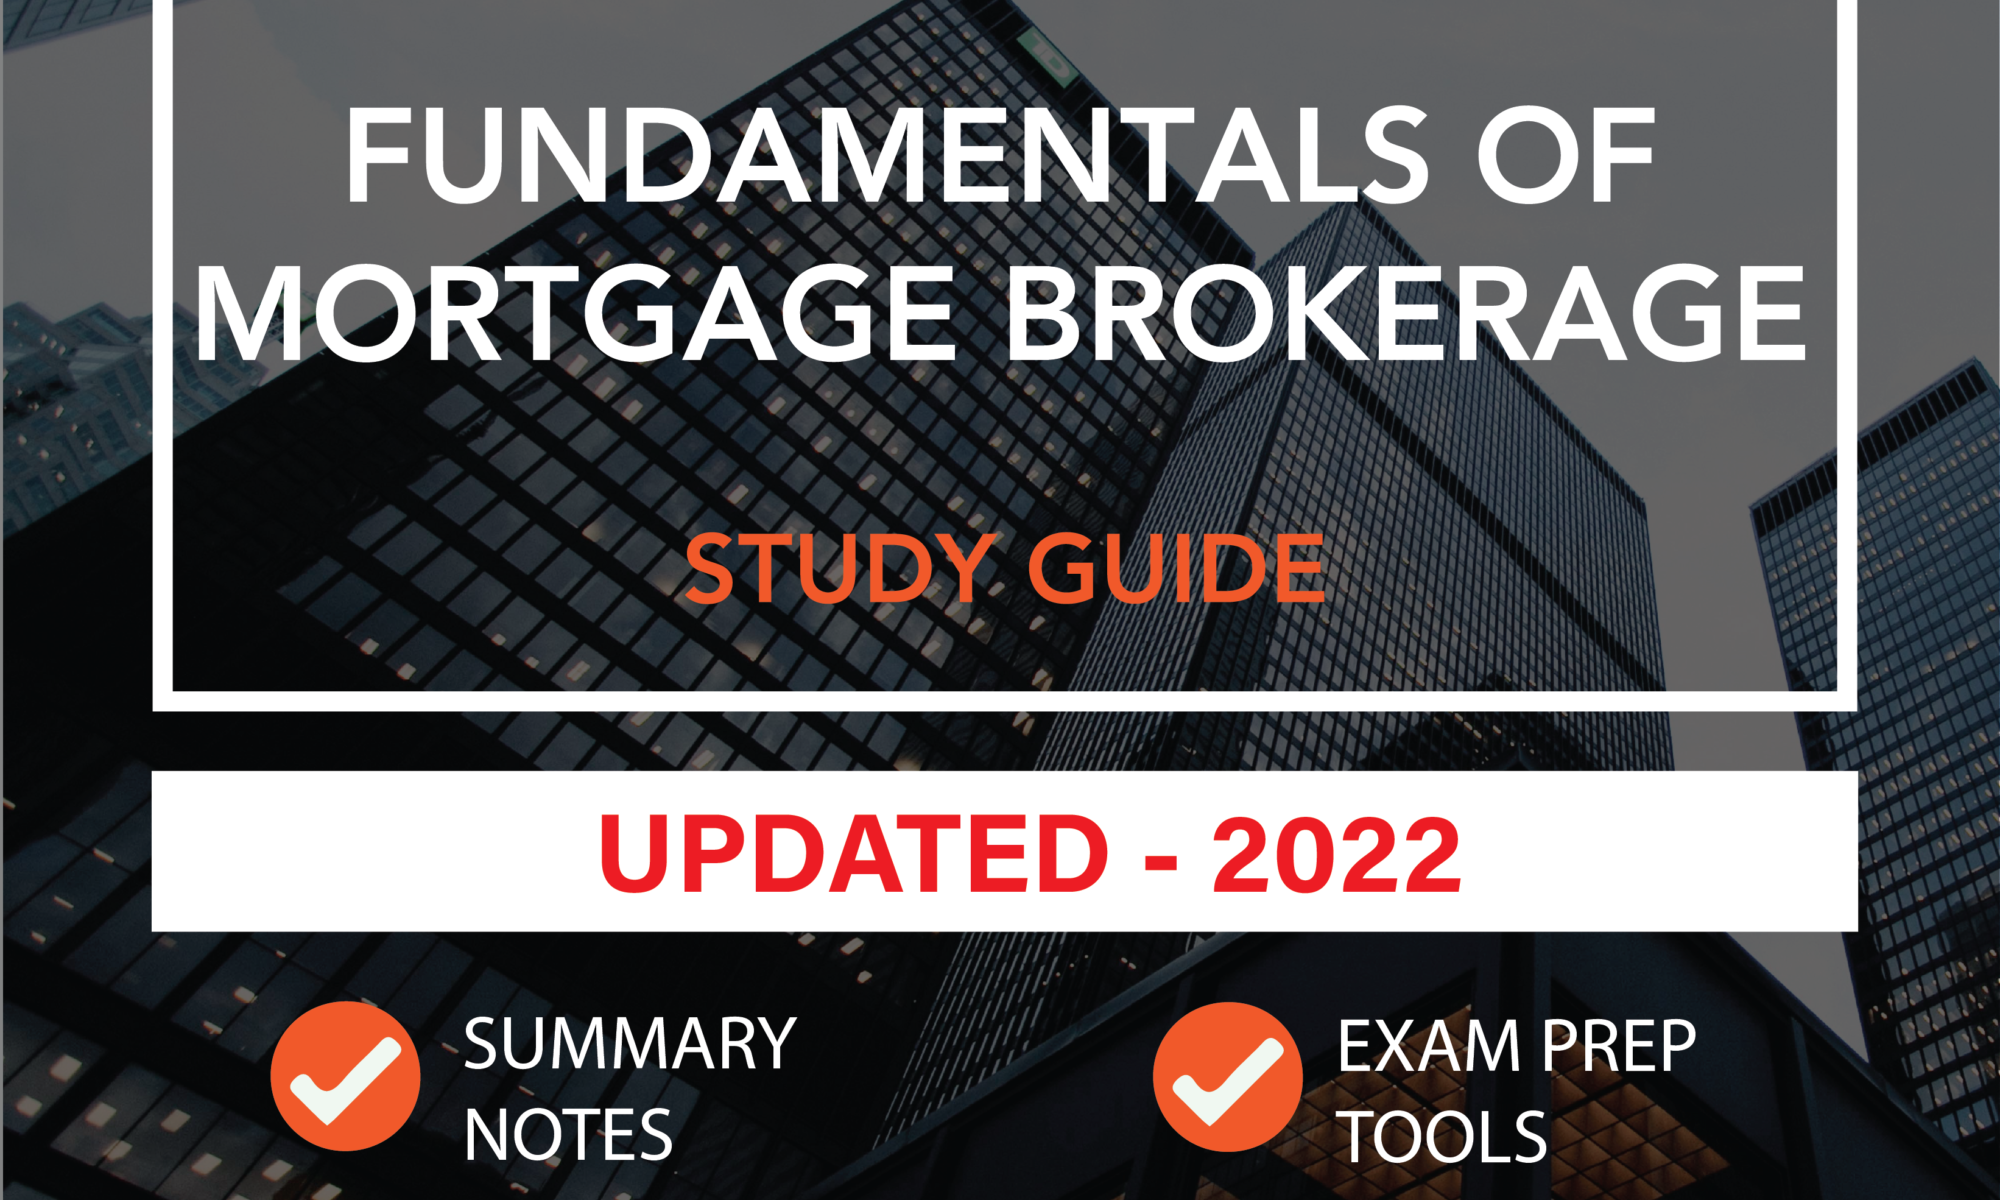 The image shows the title "Fundamentals of Mortgage Brokerage - Study Guide" that refers to a product that offers study guides for the Fundamentals of Mortgage Brokerage Licensing Course in Alberta by Alberta Real Estate School.